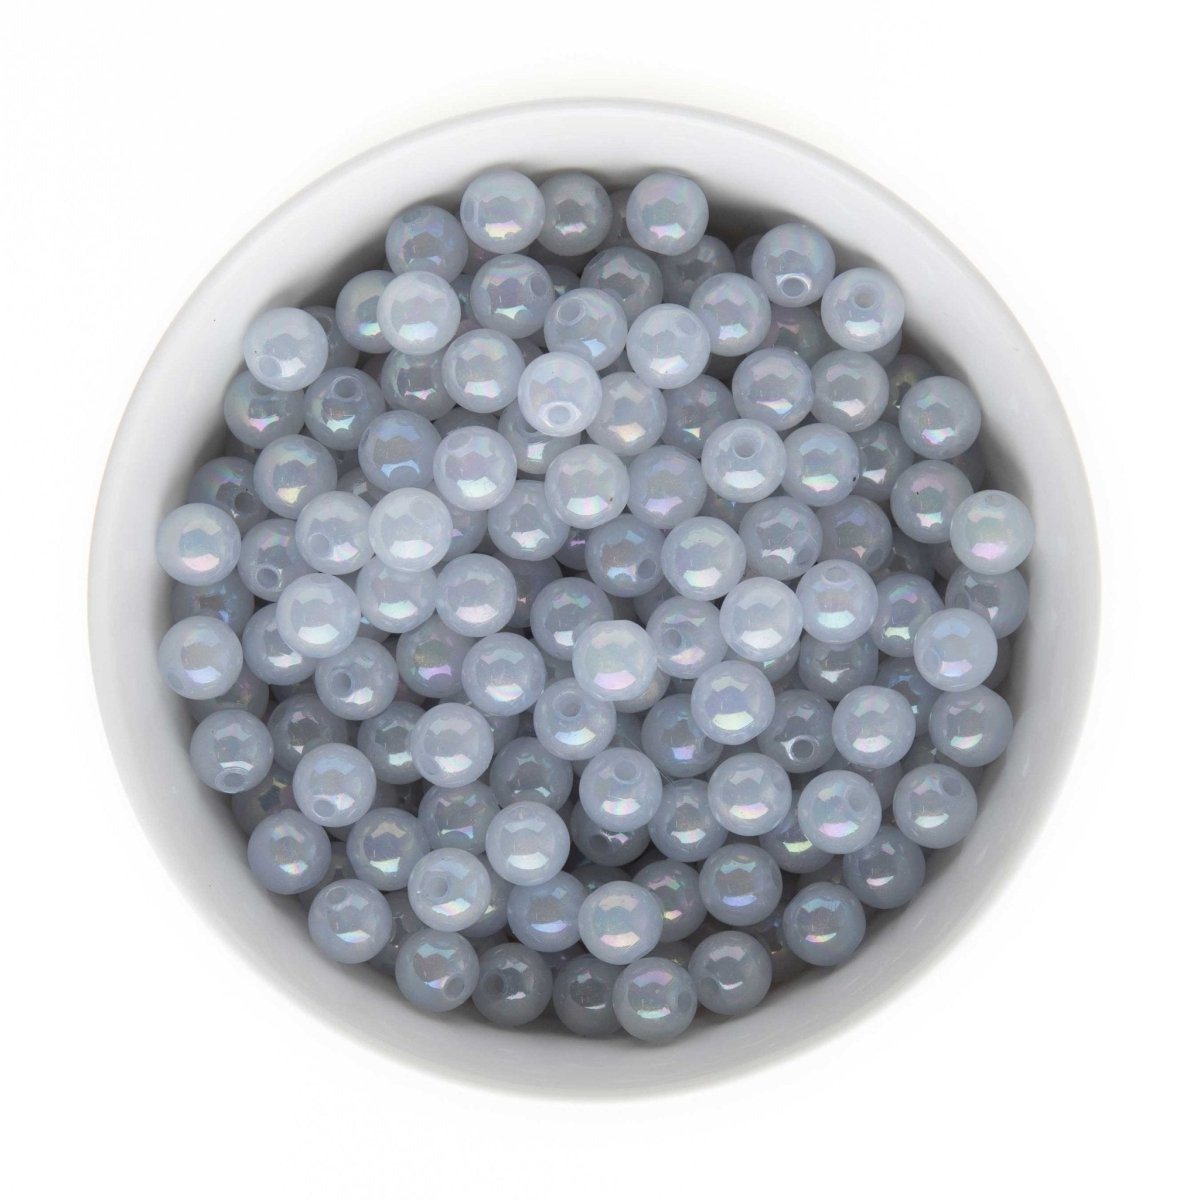 Acrylic Round Beads Clear Shimmer 10mm Light Grey AB from Cara & Co Craft Supply